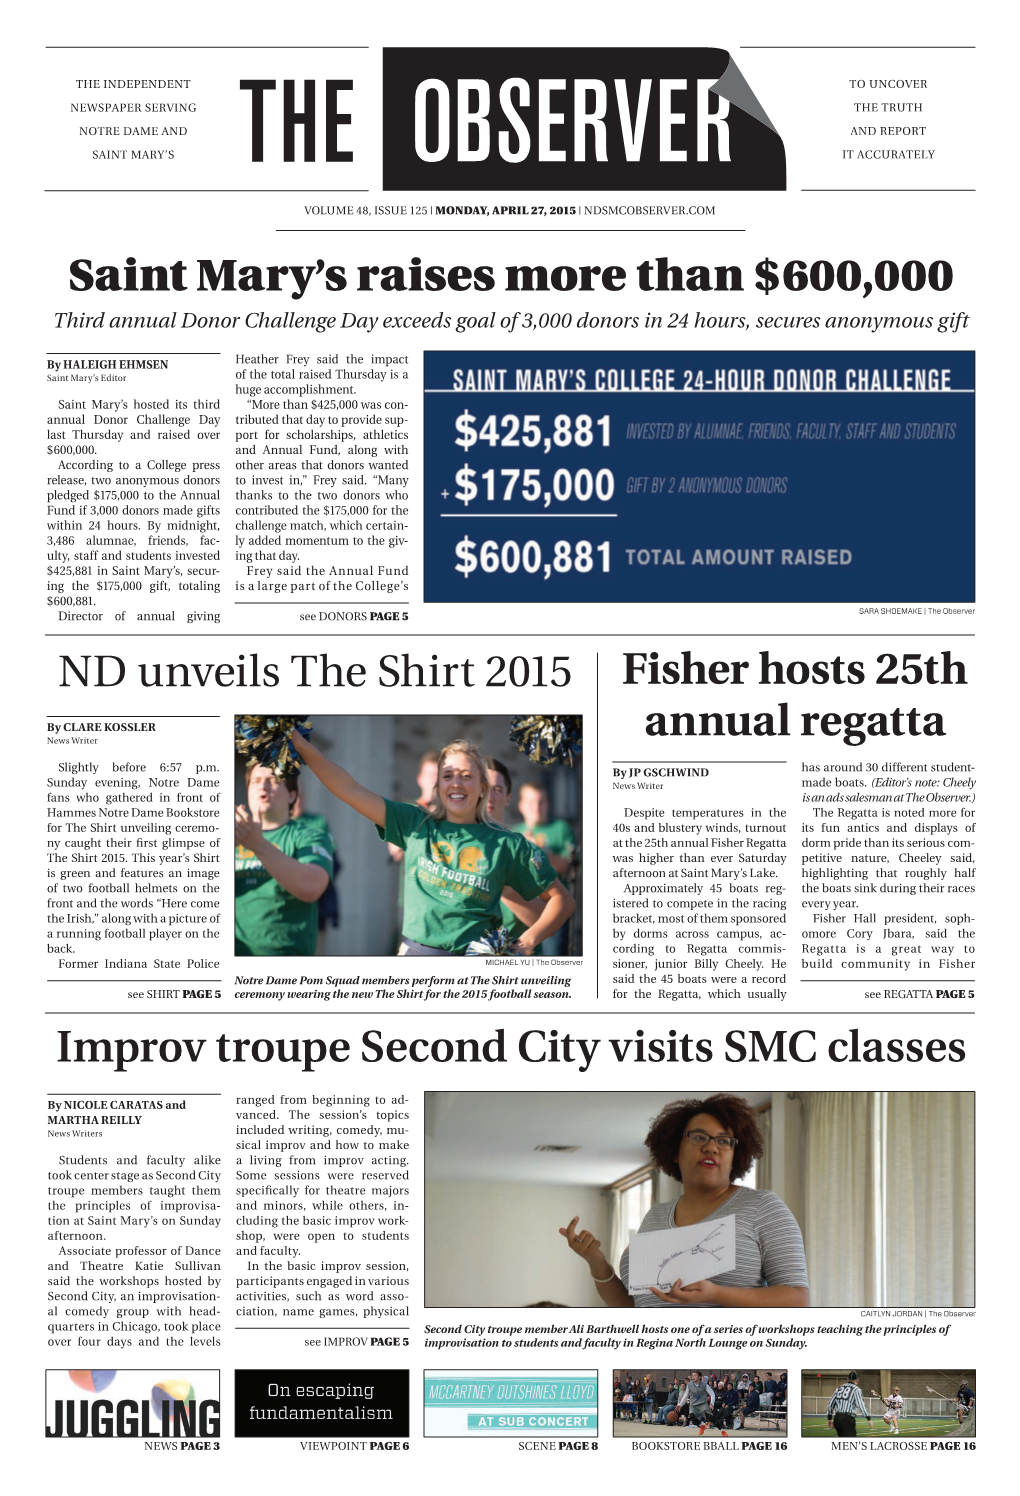 Saint Mary's Raises More Than $600,000 Nd Unveils the Shirt 2015